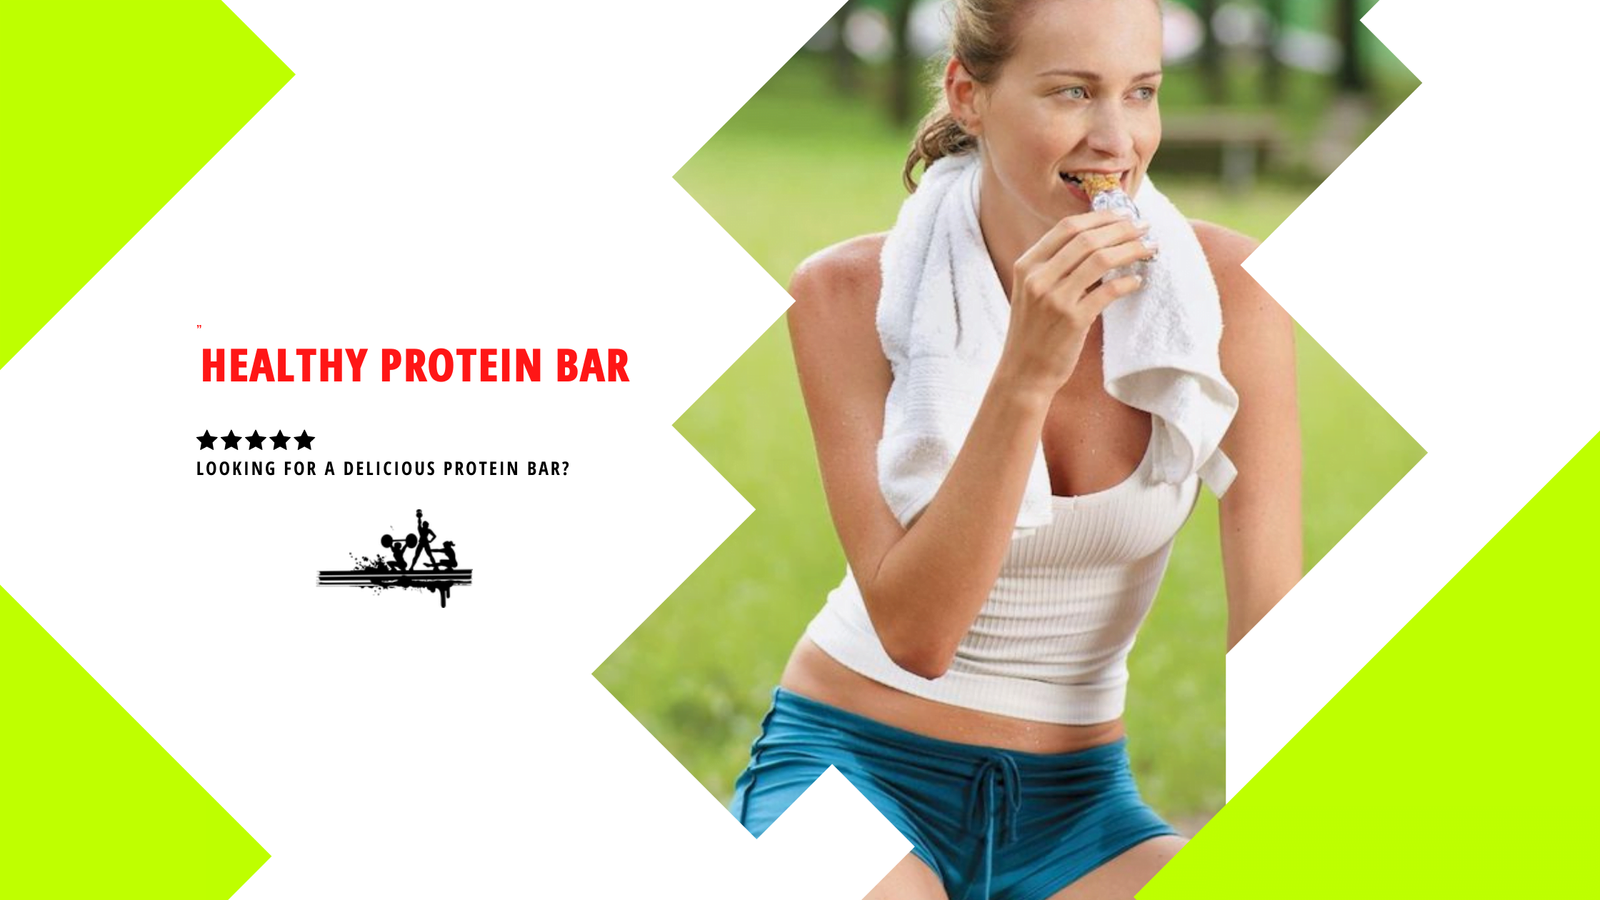 Looking for a Delicious Protein Bar